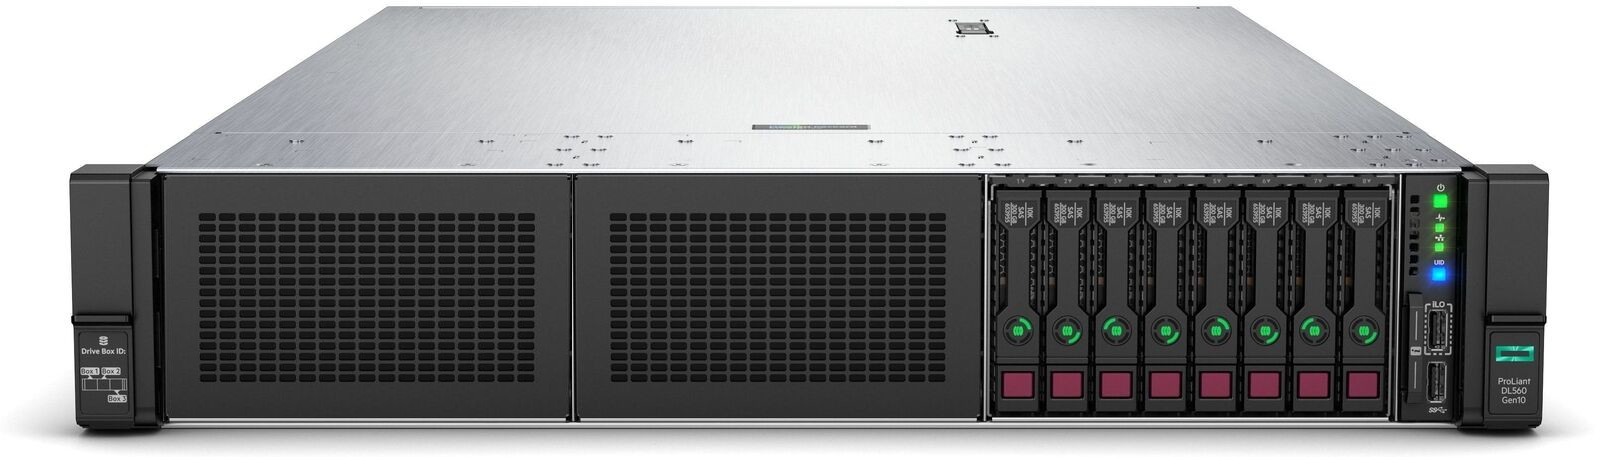 HPE ProLiant DL560 Gen10 Intel Xeon Gold 6254 3.1 GHz 256GB 4P - Click Image to Close